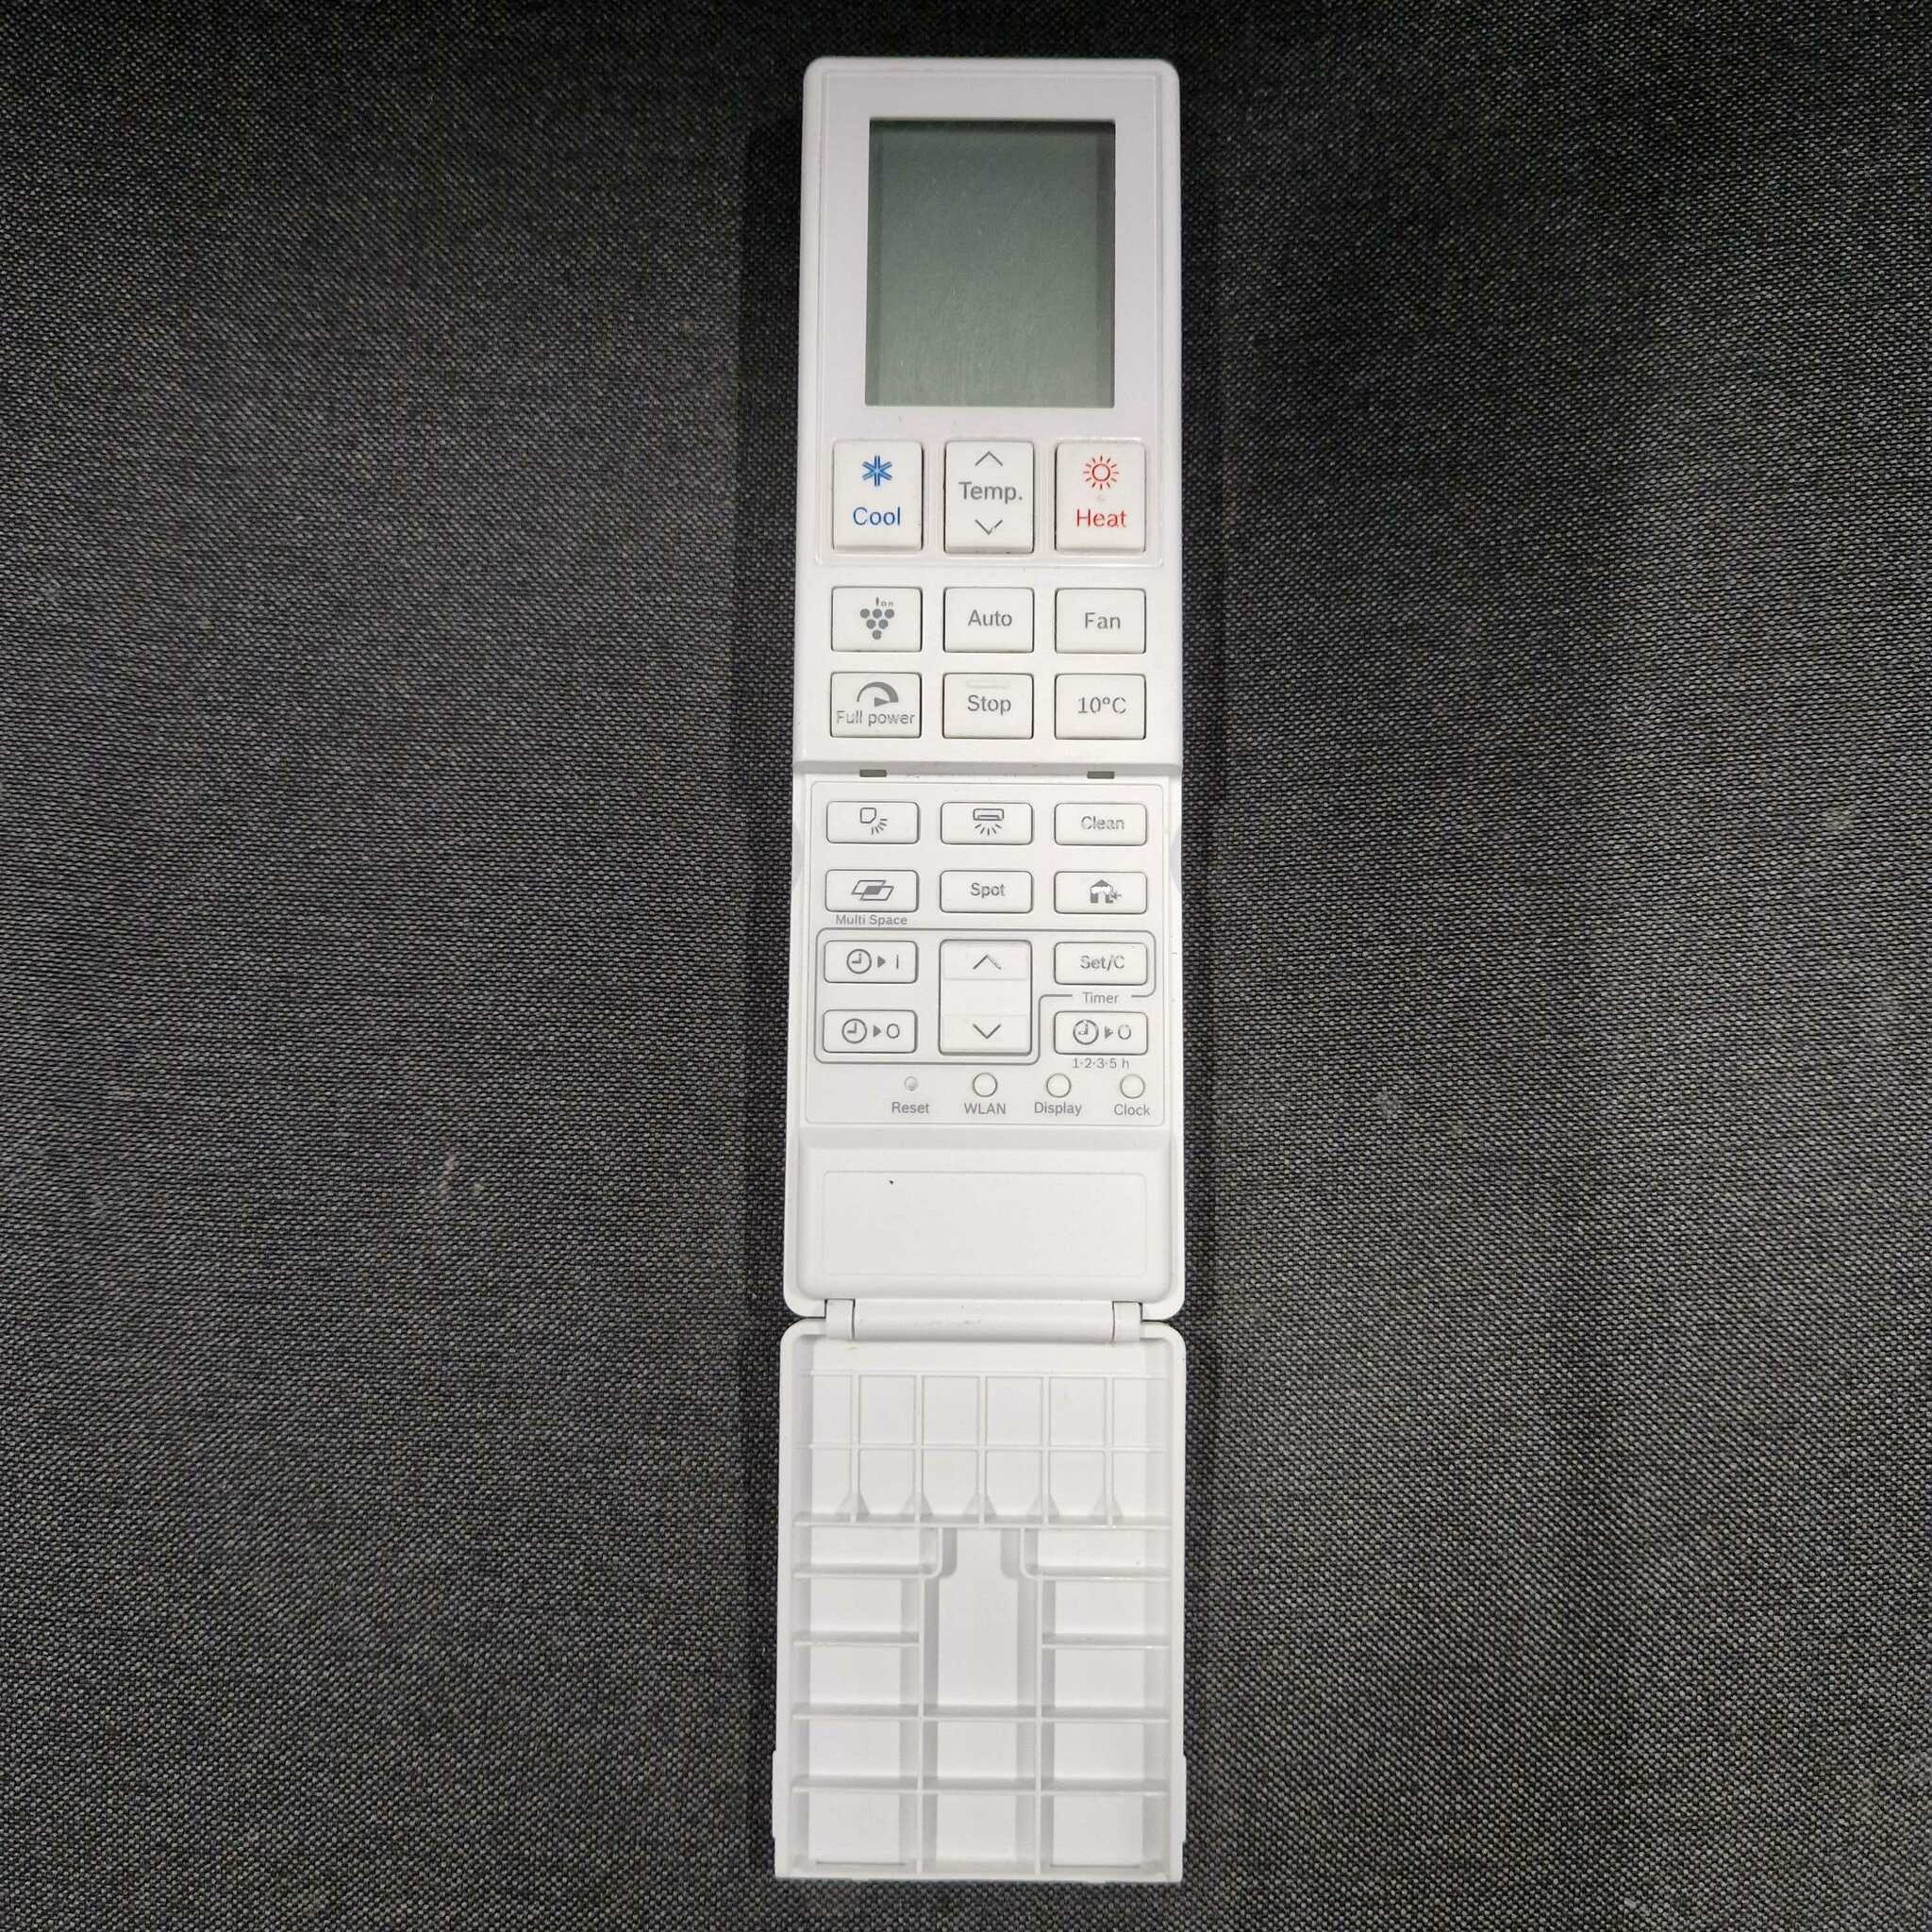 IVT Remote Control Part no. AE-IR1 - Refurbished & Tested